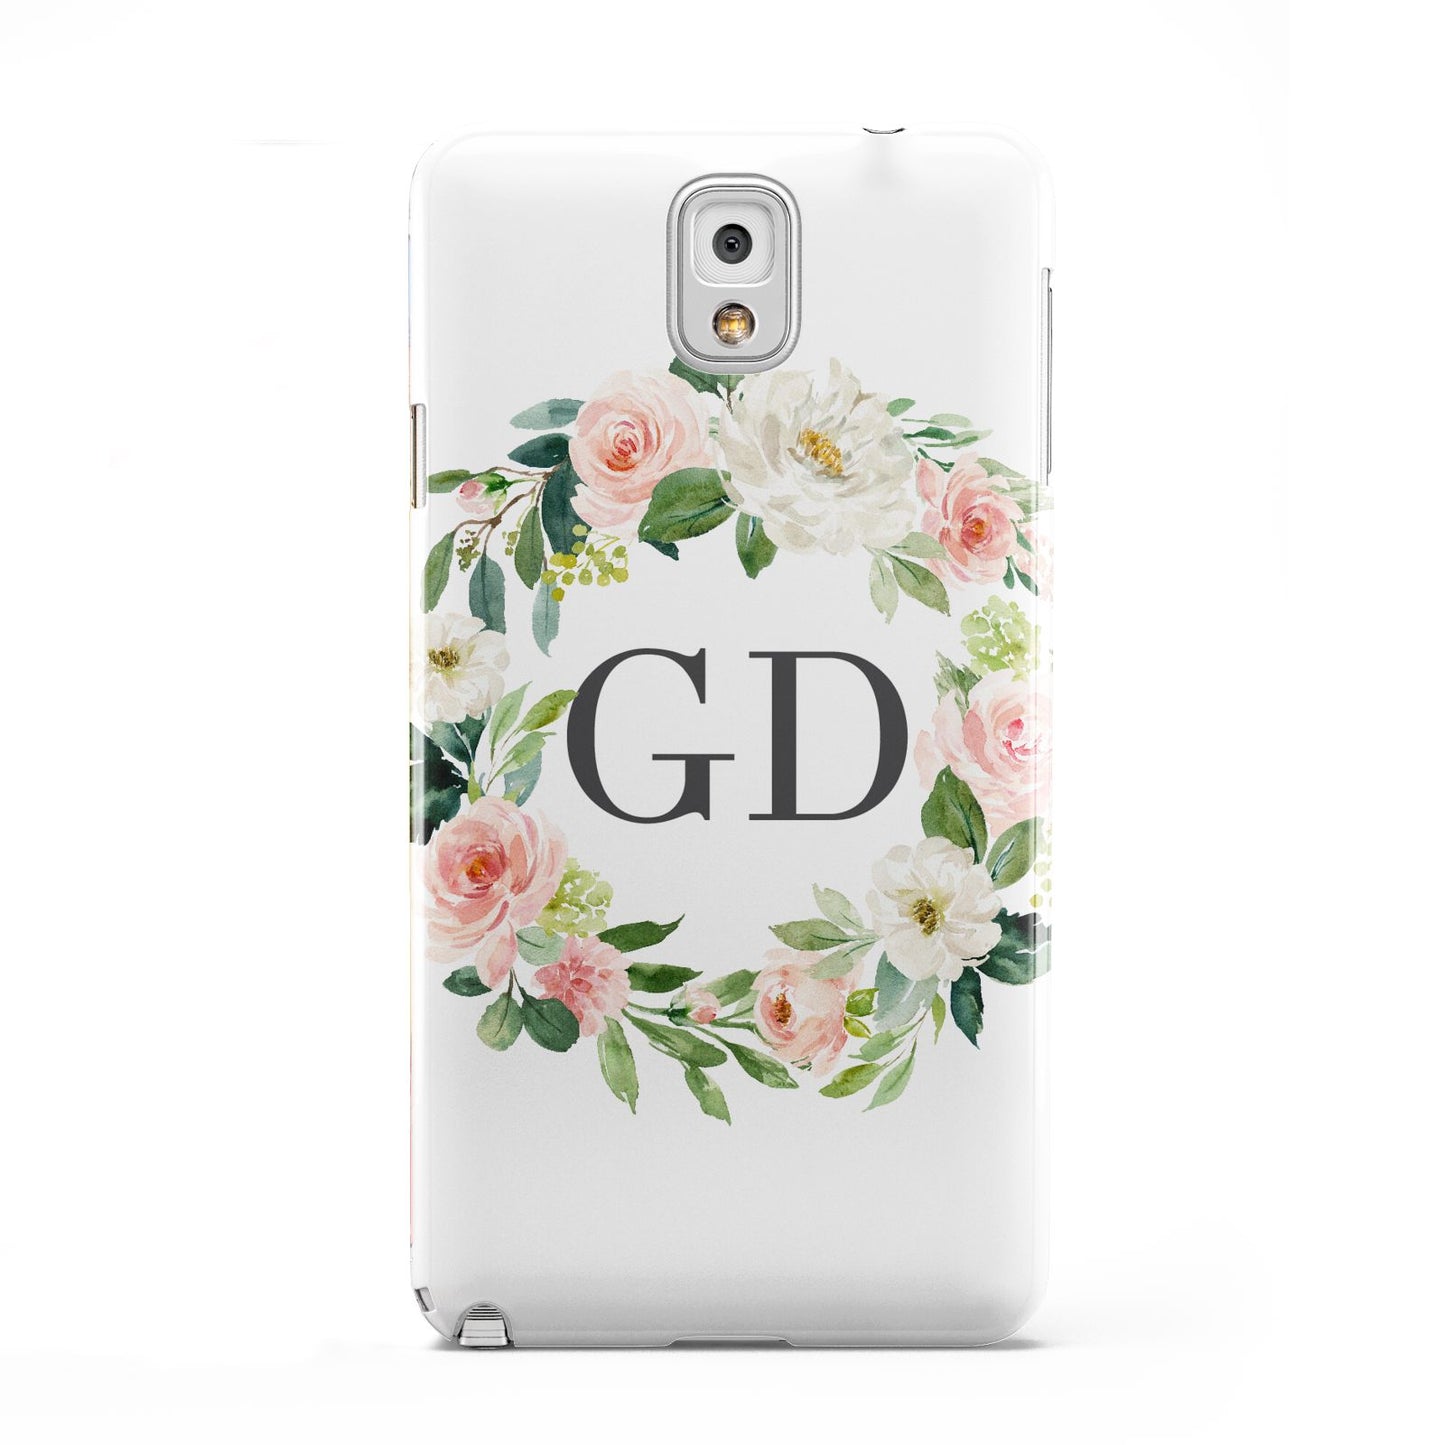 Personalised floral wreath Samsung Galaxy Note 3 Case